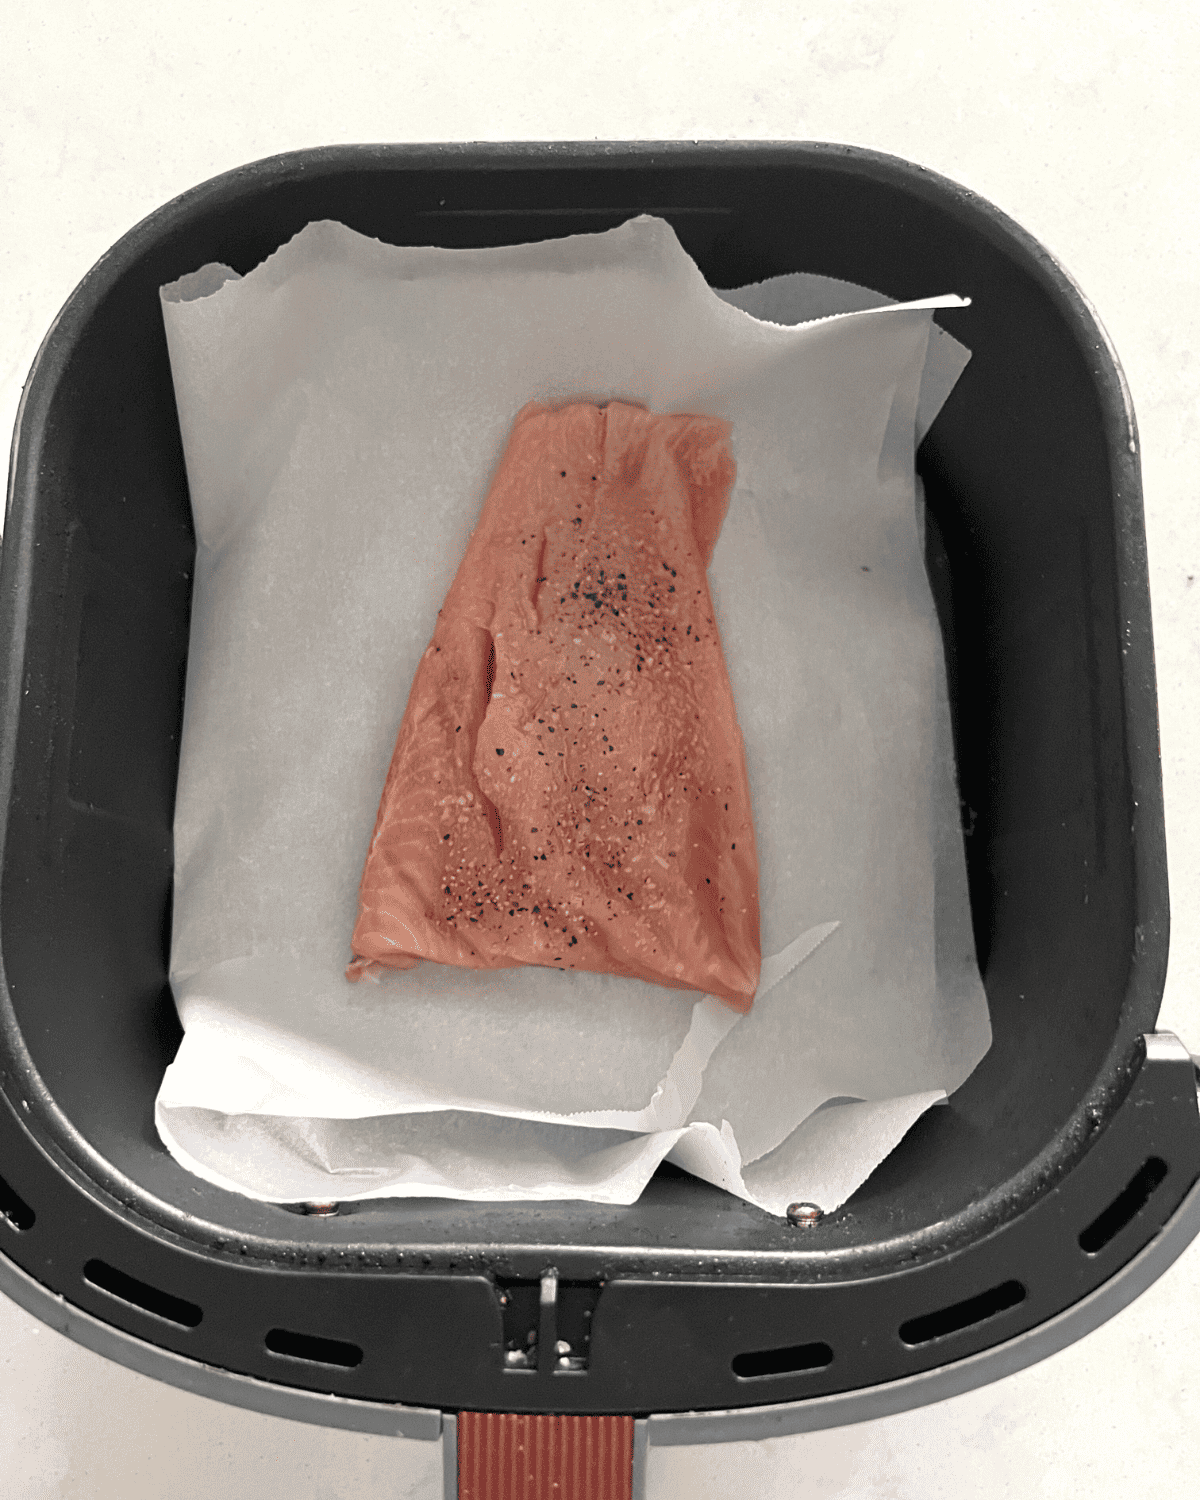 seasoned salmon filet in an air fryer basket with parchment paper.